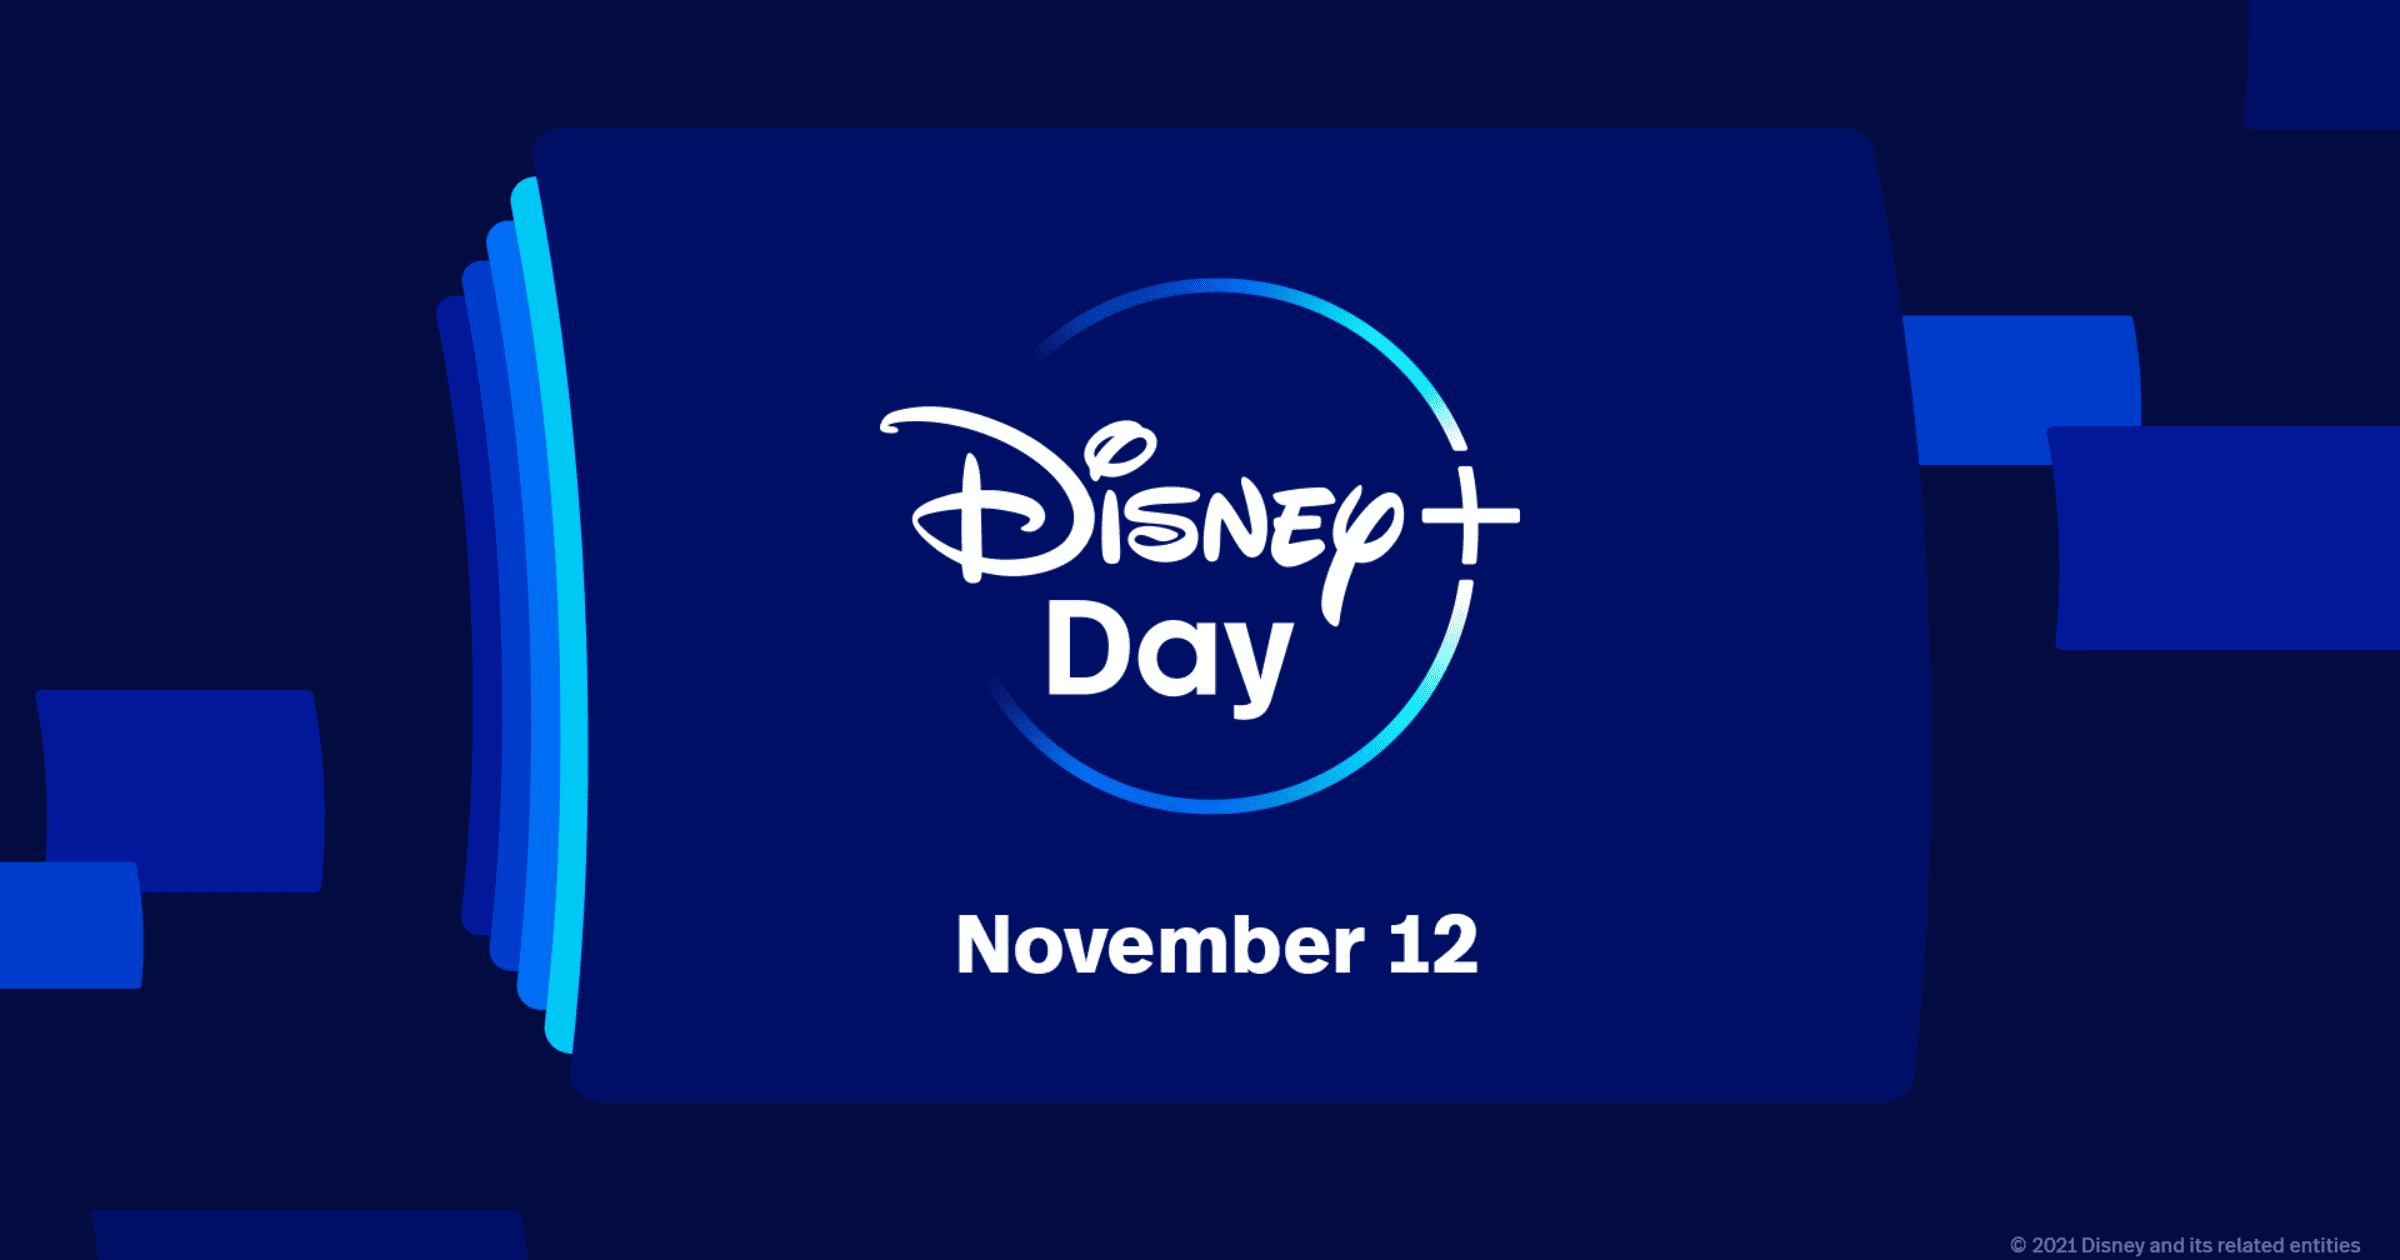 Disney+ Day Brings New Releases And Sign-Up Offer